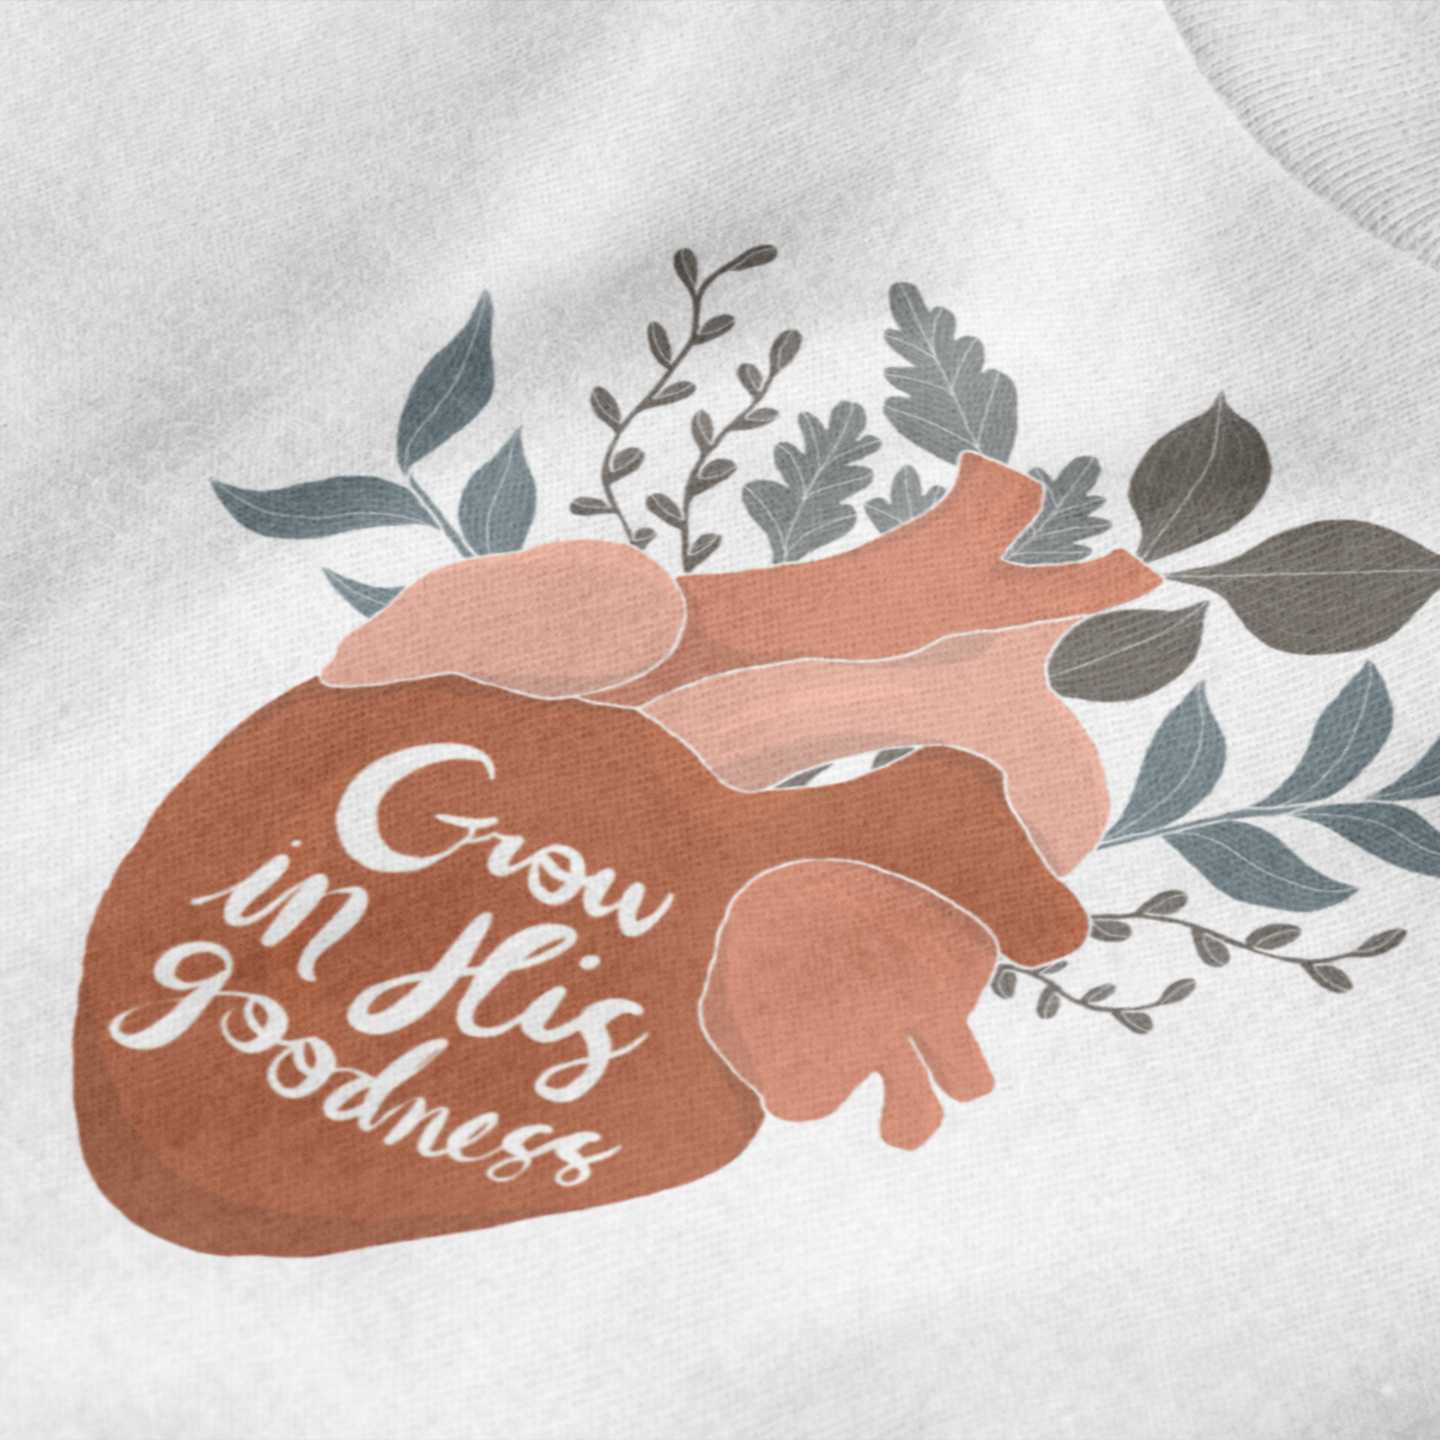 Grow in His Goodness Unisex T-Shirt Violet Heart Studios